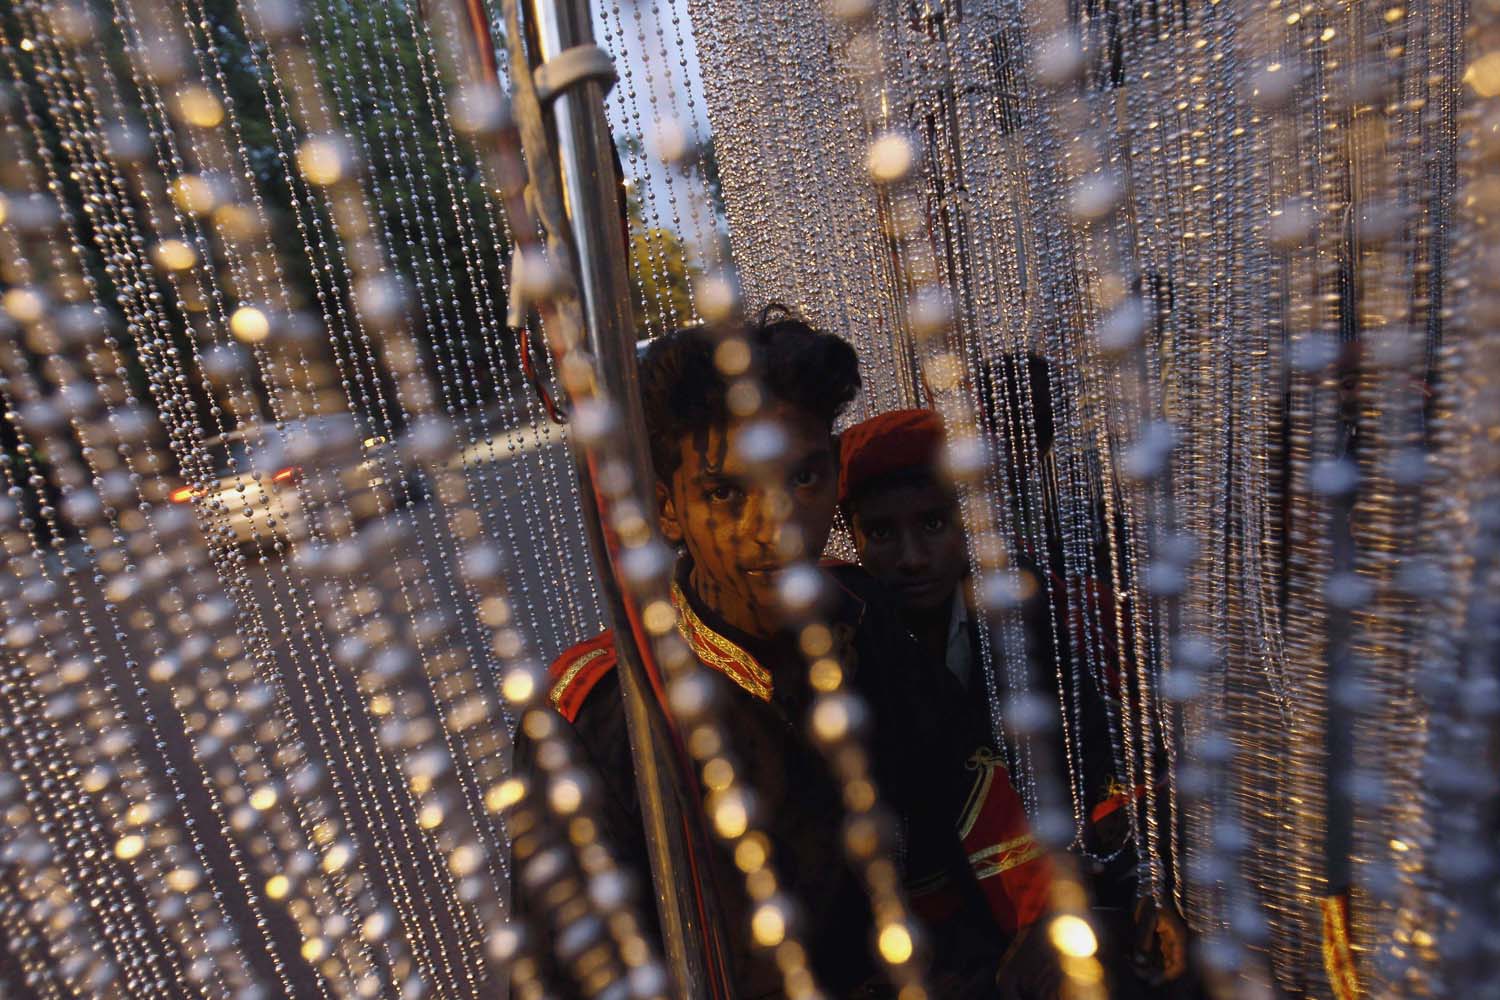 May 29, 2013. A band member carries a light prior to a wedding procession in New Delhi.